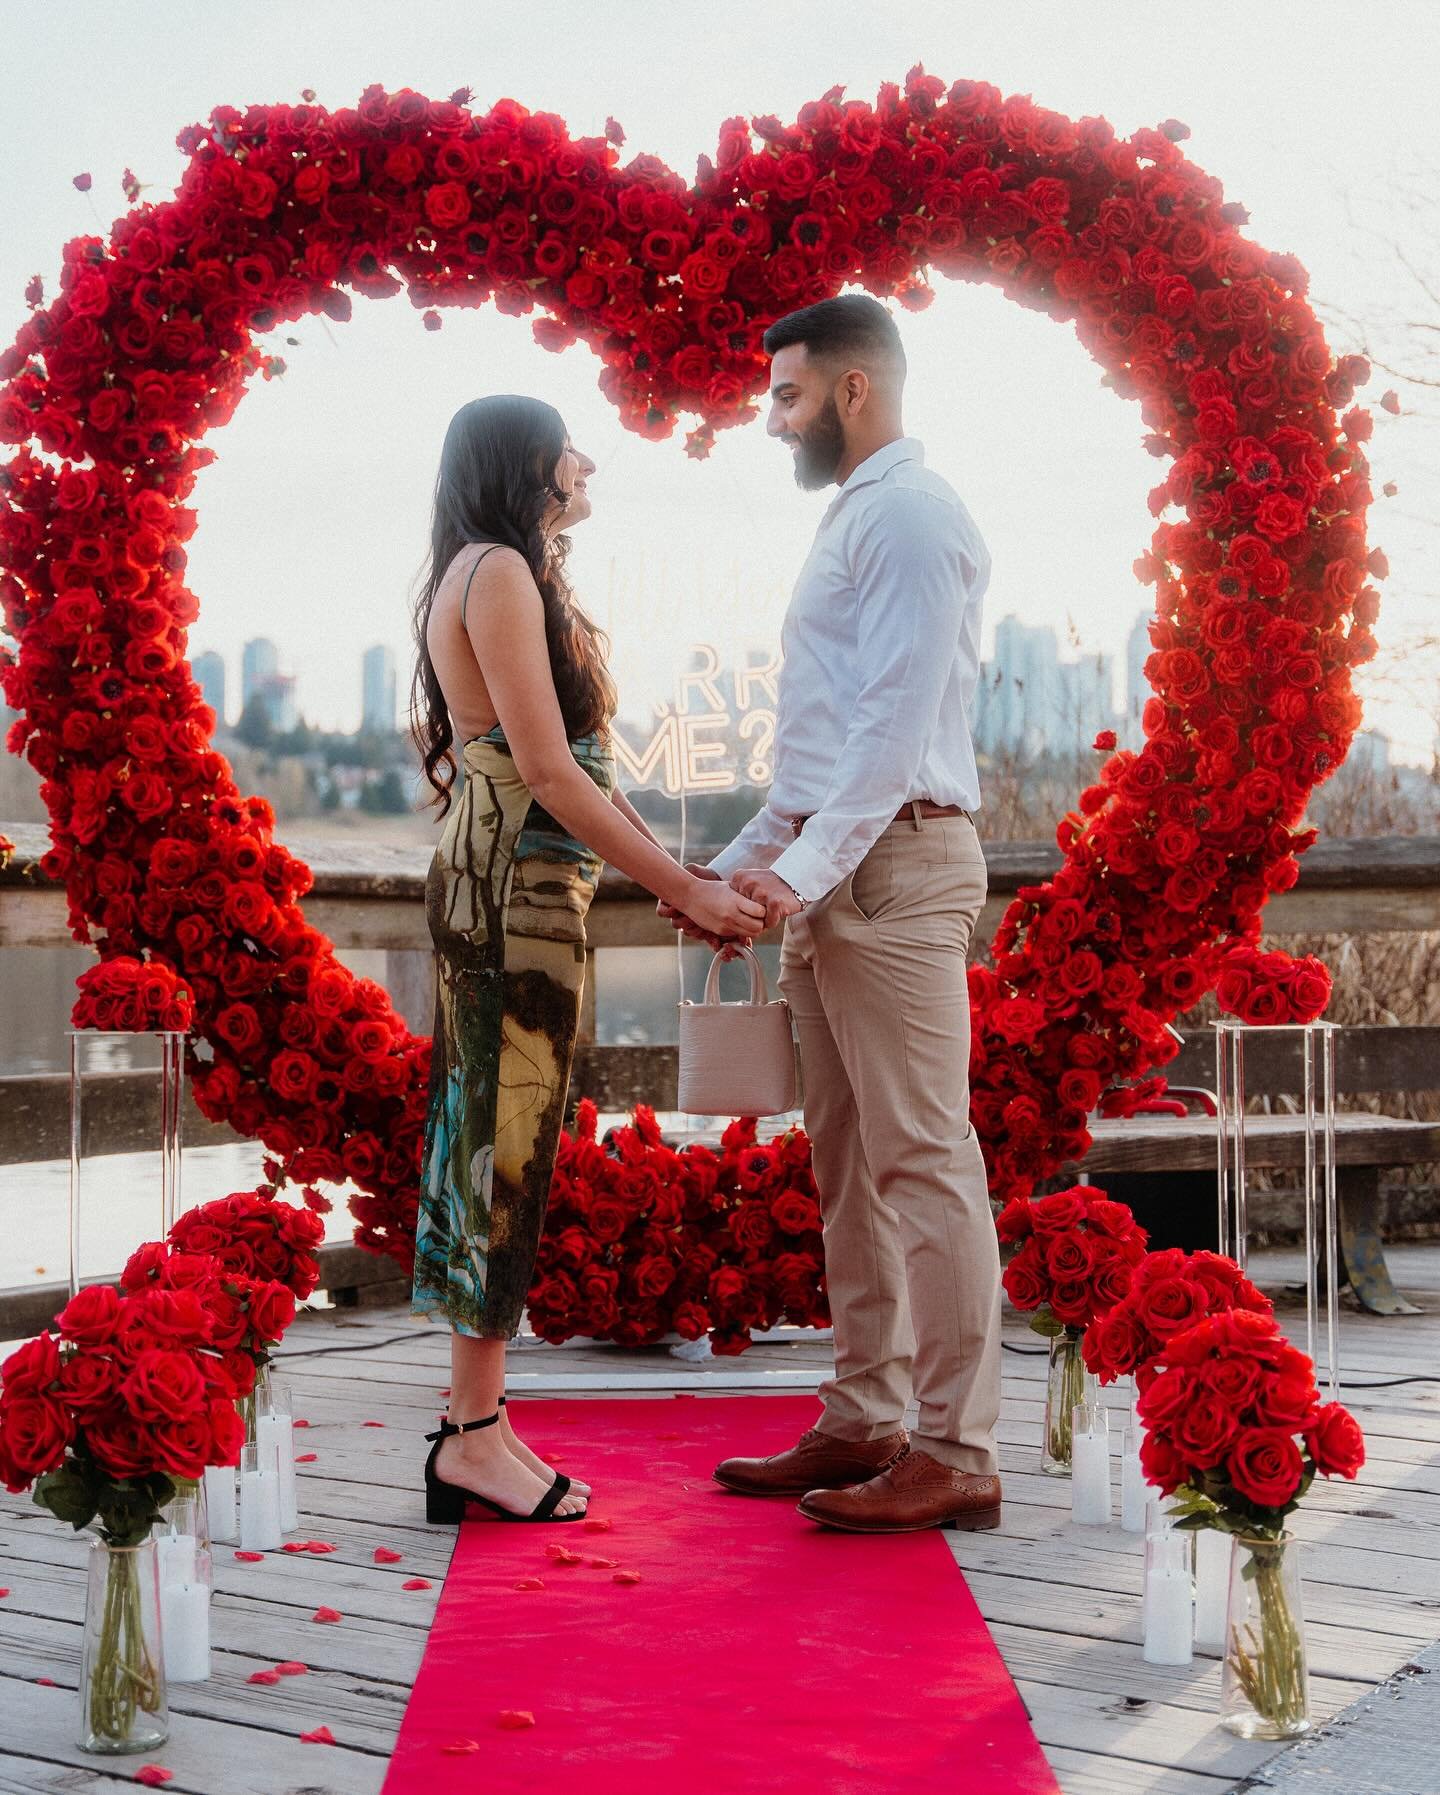 Kevin and Tannya 💍

A truely surprising proposal for Tanya as she was not expecting it. As soon as she saw the setup, the tears started flowing. She almost never wore her dress because she didn&rsquo;t think Kevin was proposing to her quite yet, but